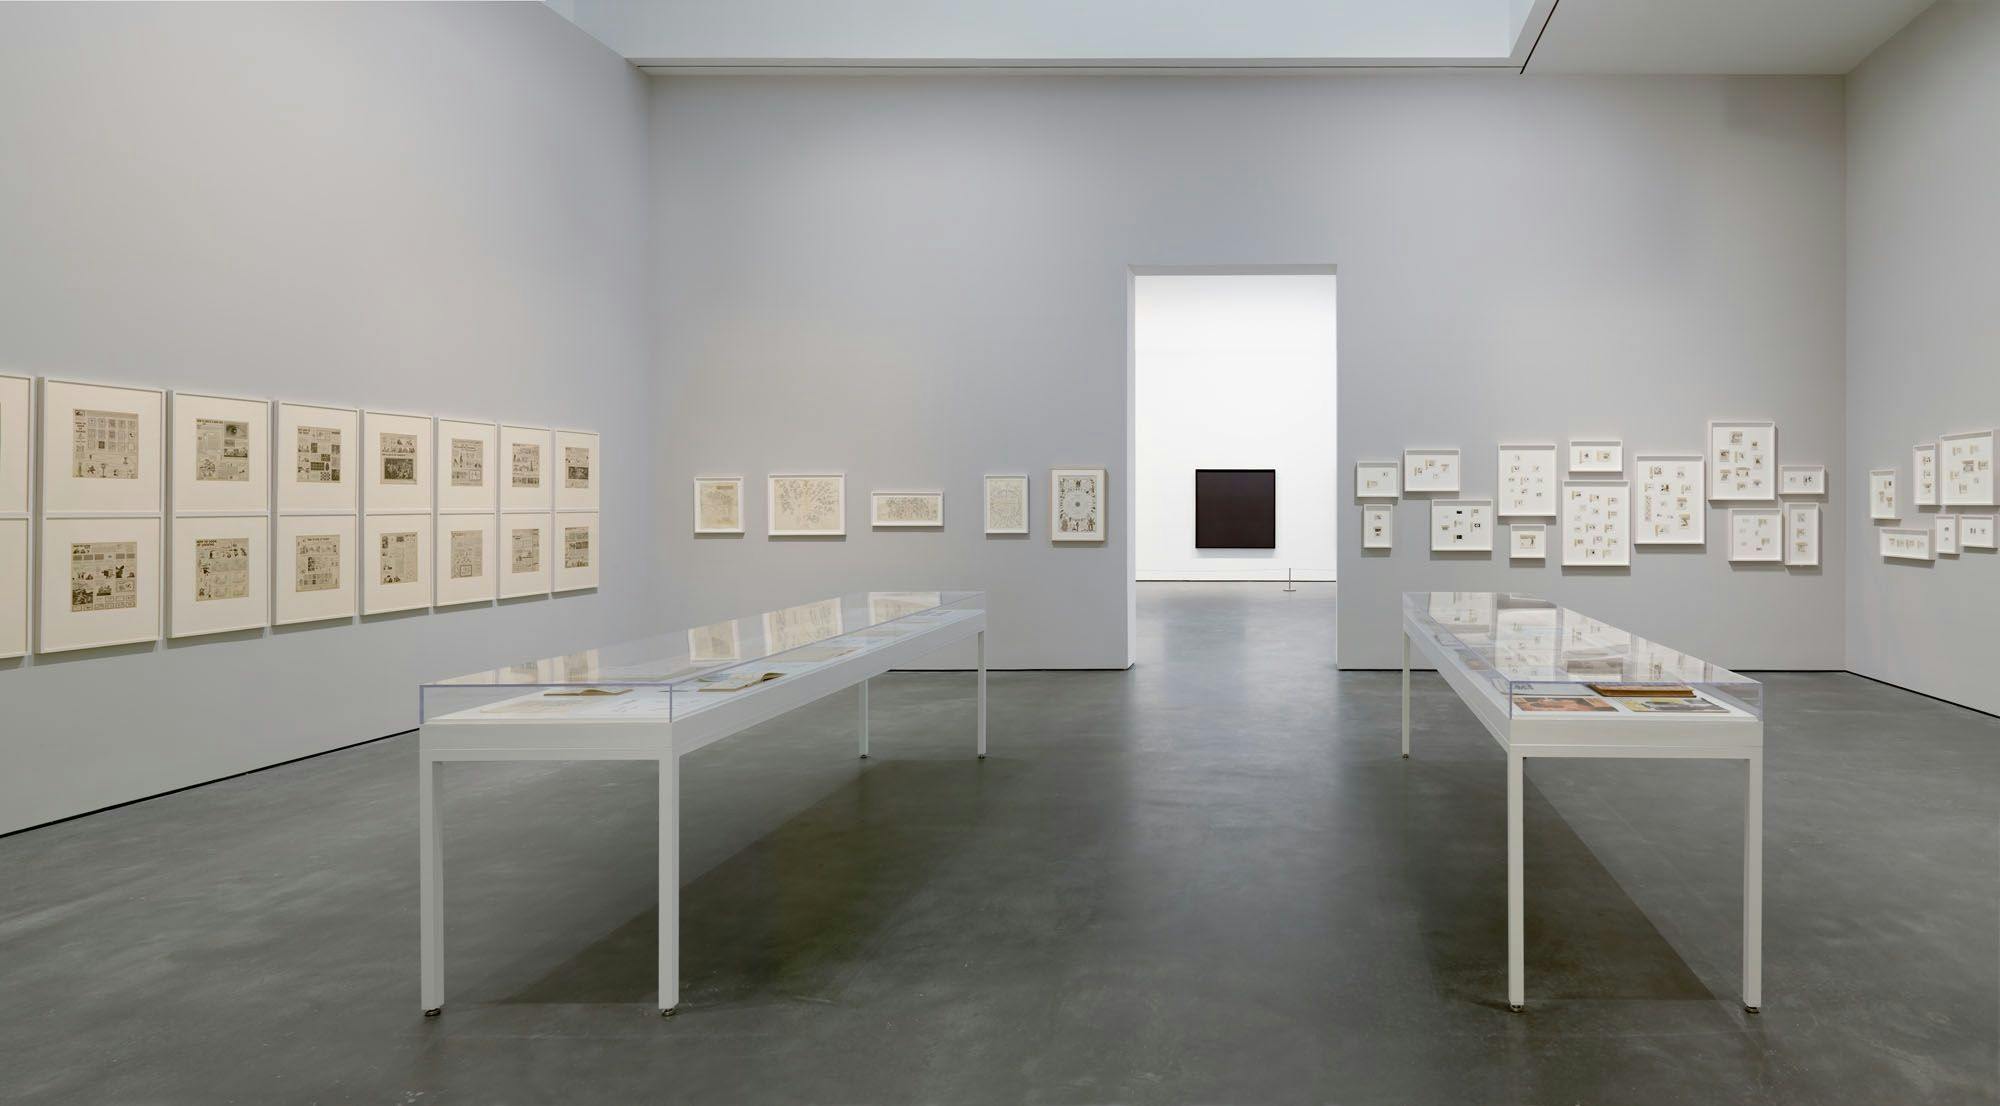 Installation view of Robert Arneson: Early Work, at David Zwirner in New York, dated 2013.